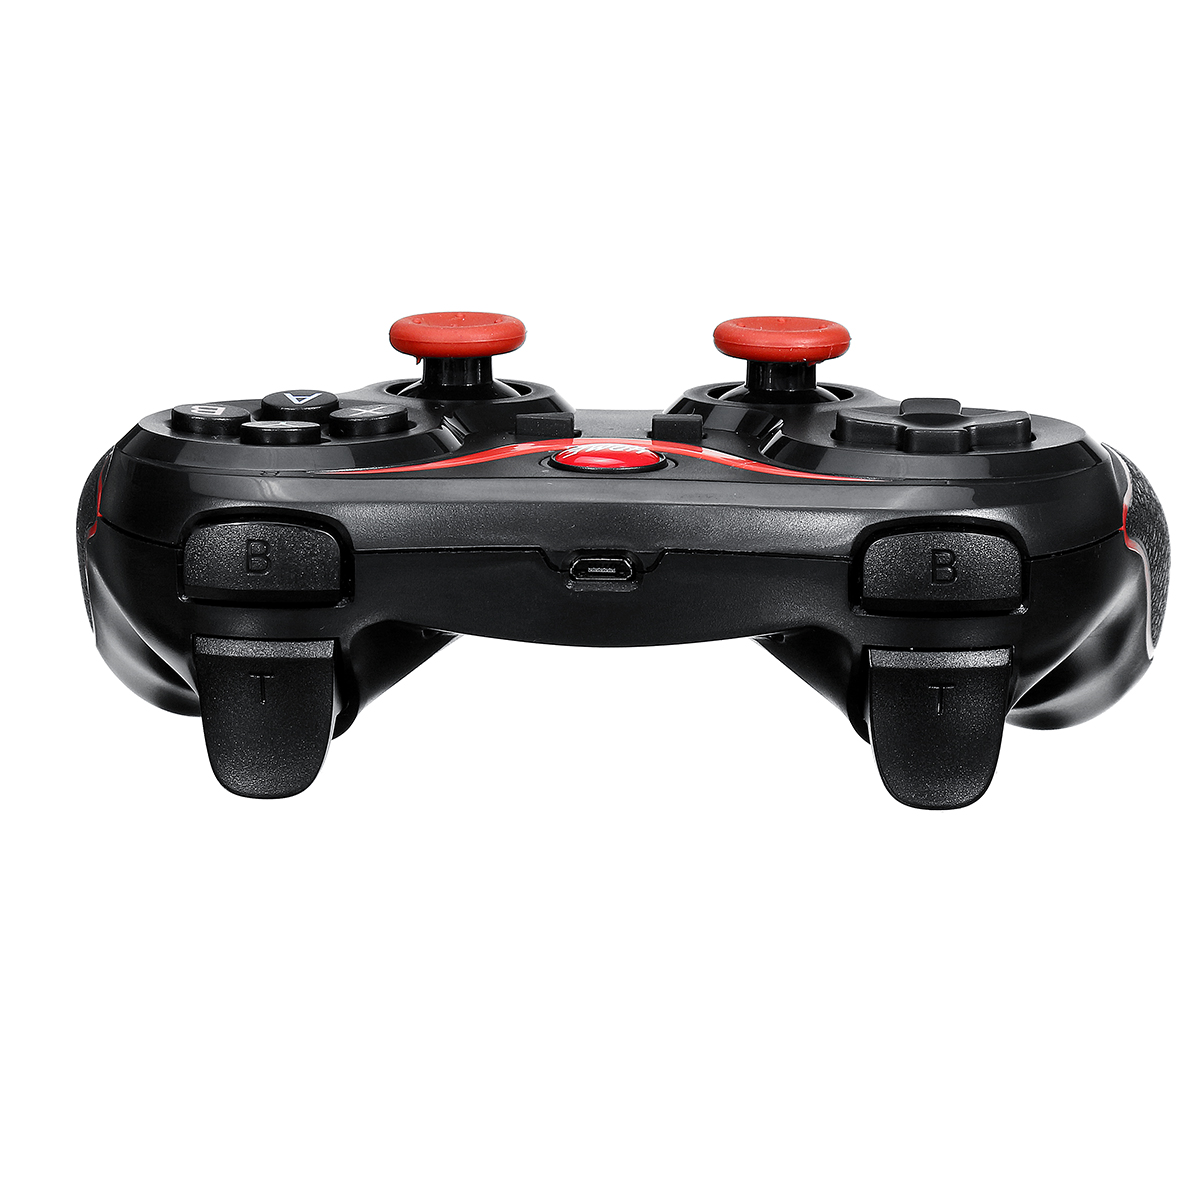 T3-bluetooth-Wireless-Gamepad-Gaming-Controller-for-iOS-Android-Mobile-Phone-Tablet-PC-VR-Glasses-Ga-1698597-7